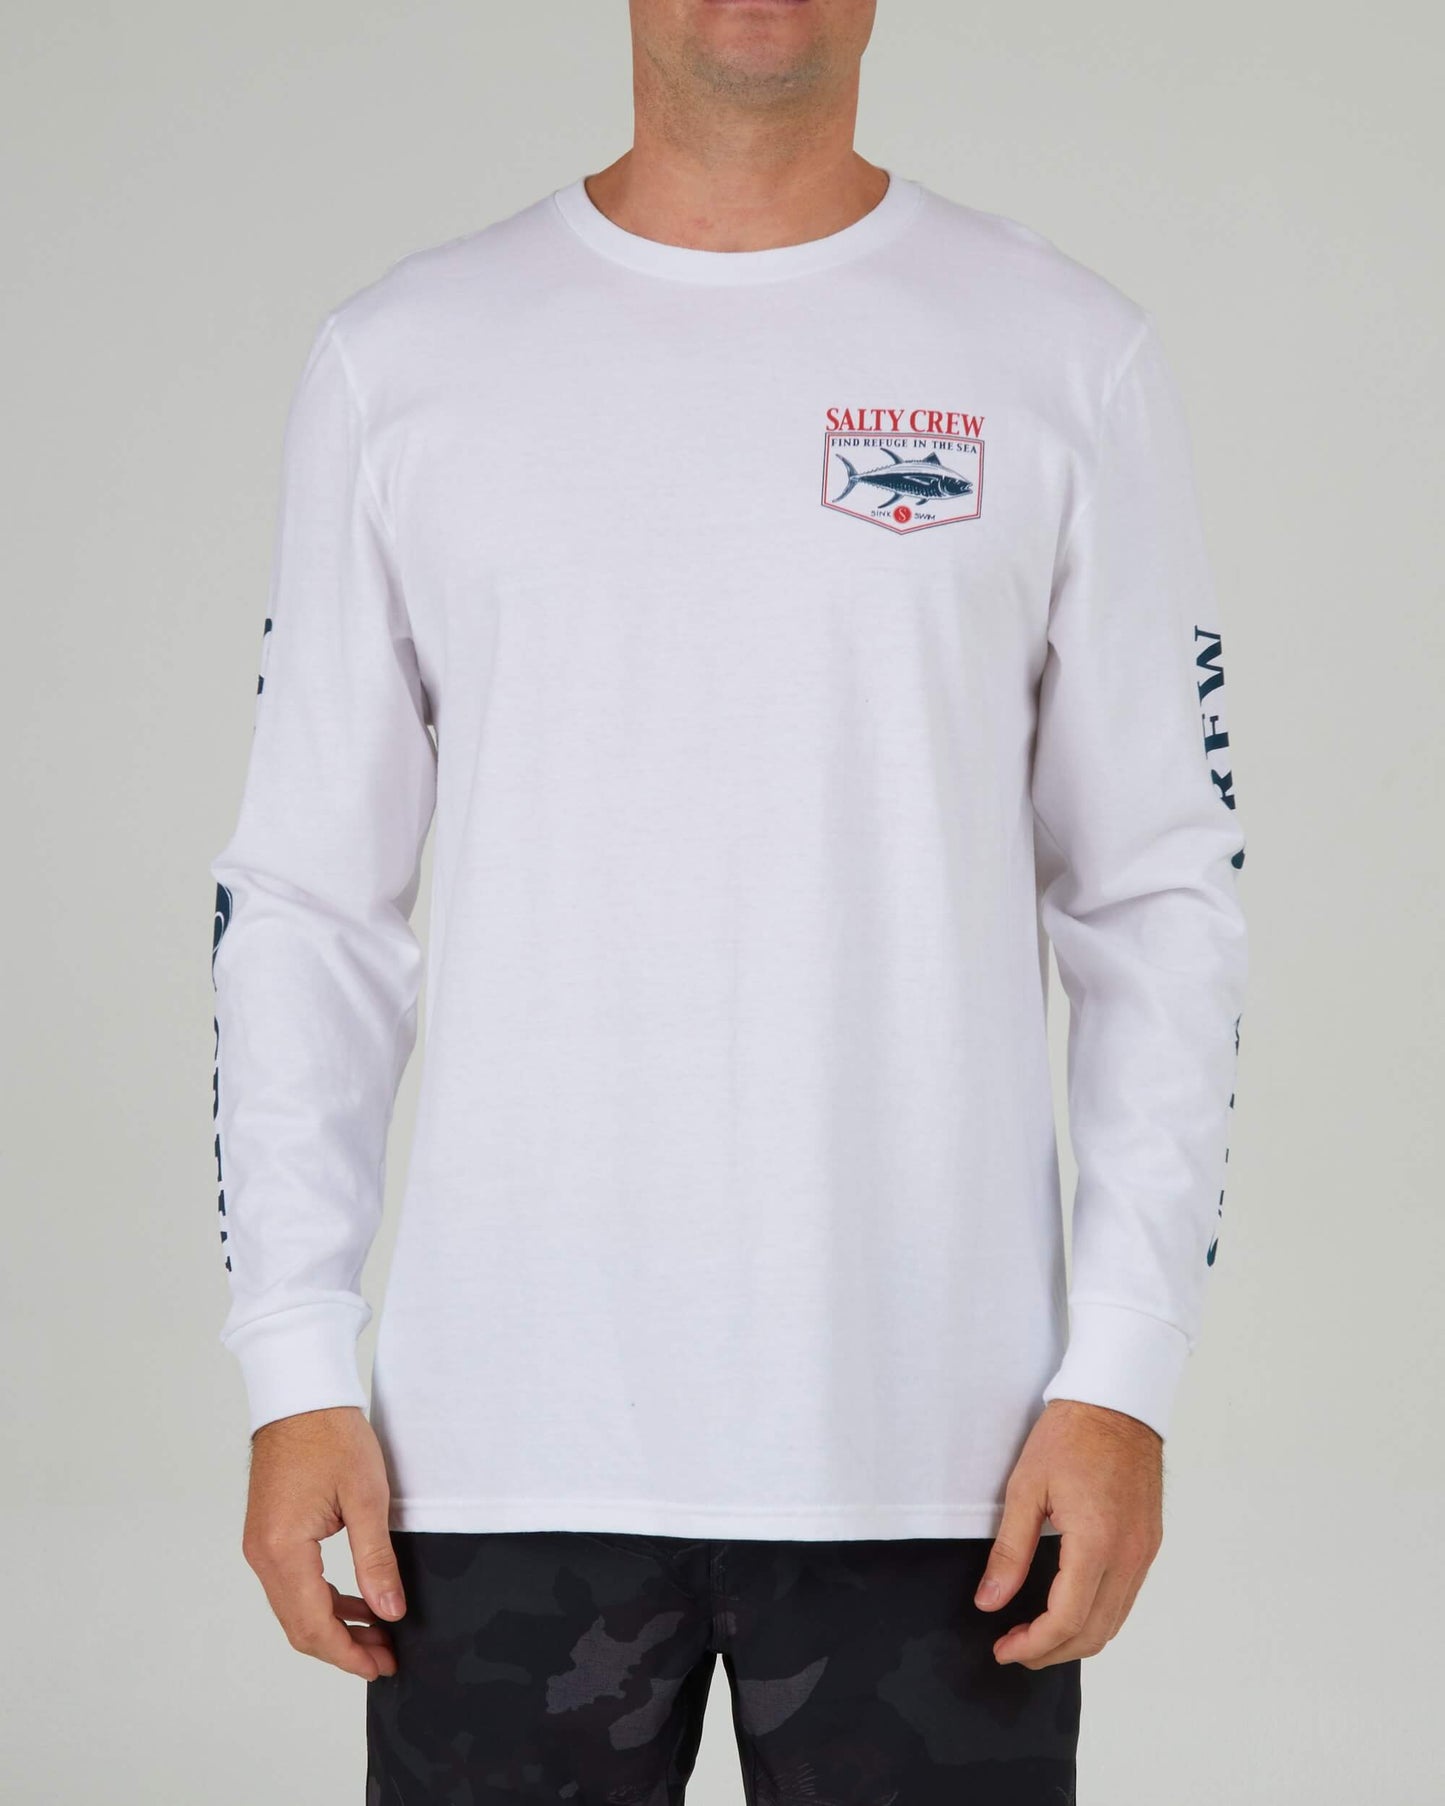 Salty crew T-SHIRTS L/S Angler Standard L/S Tee - White in White